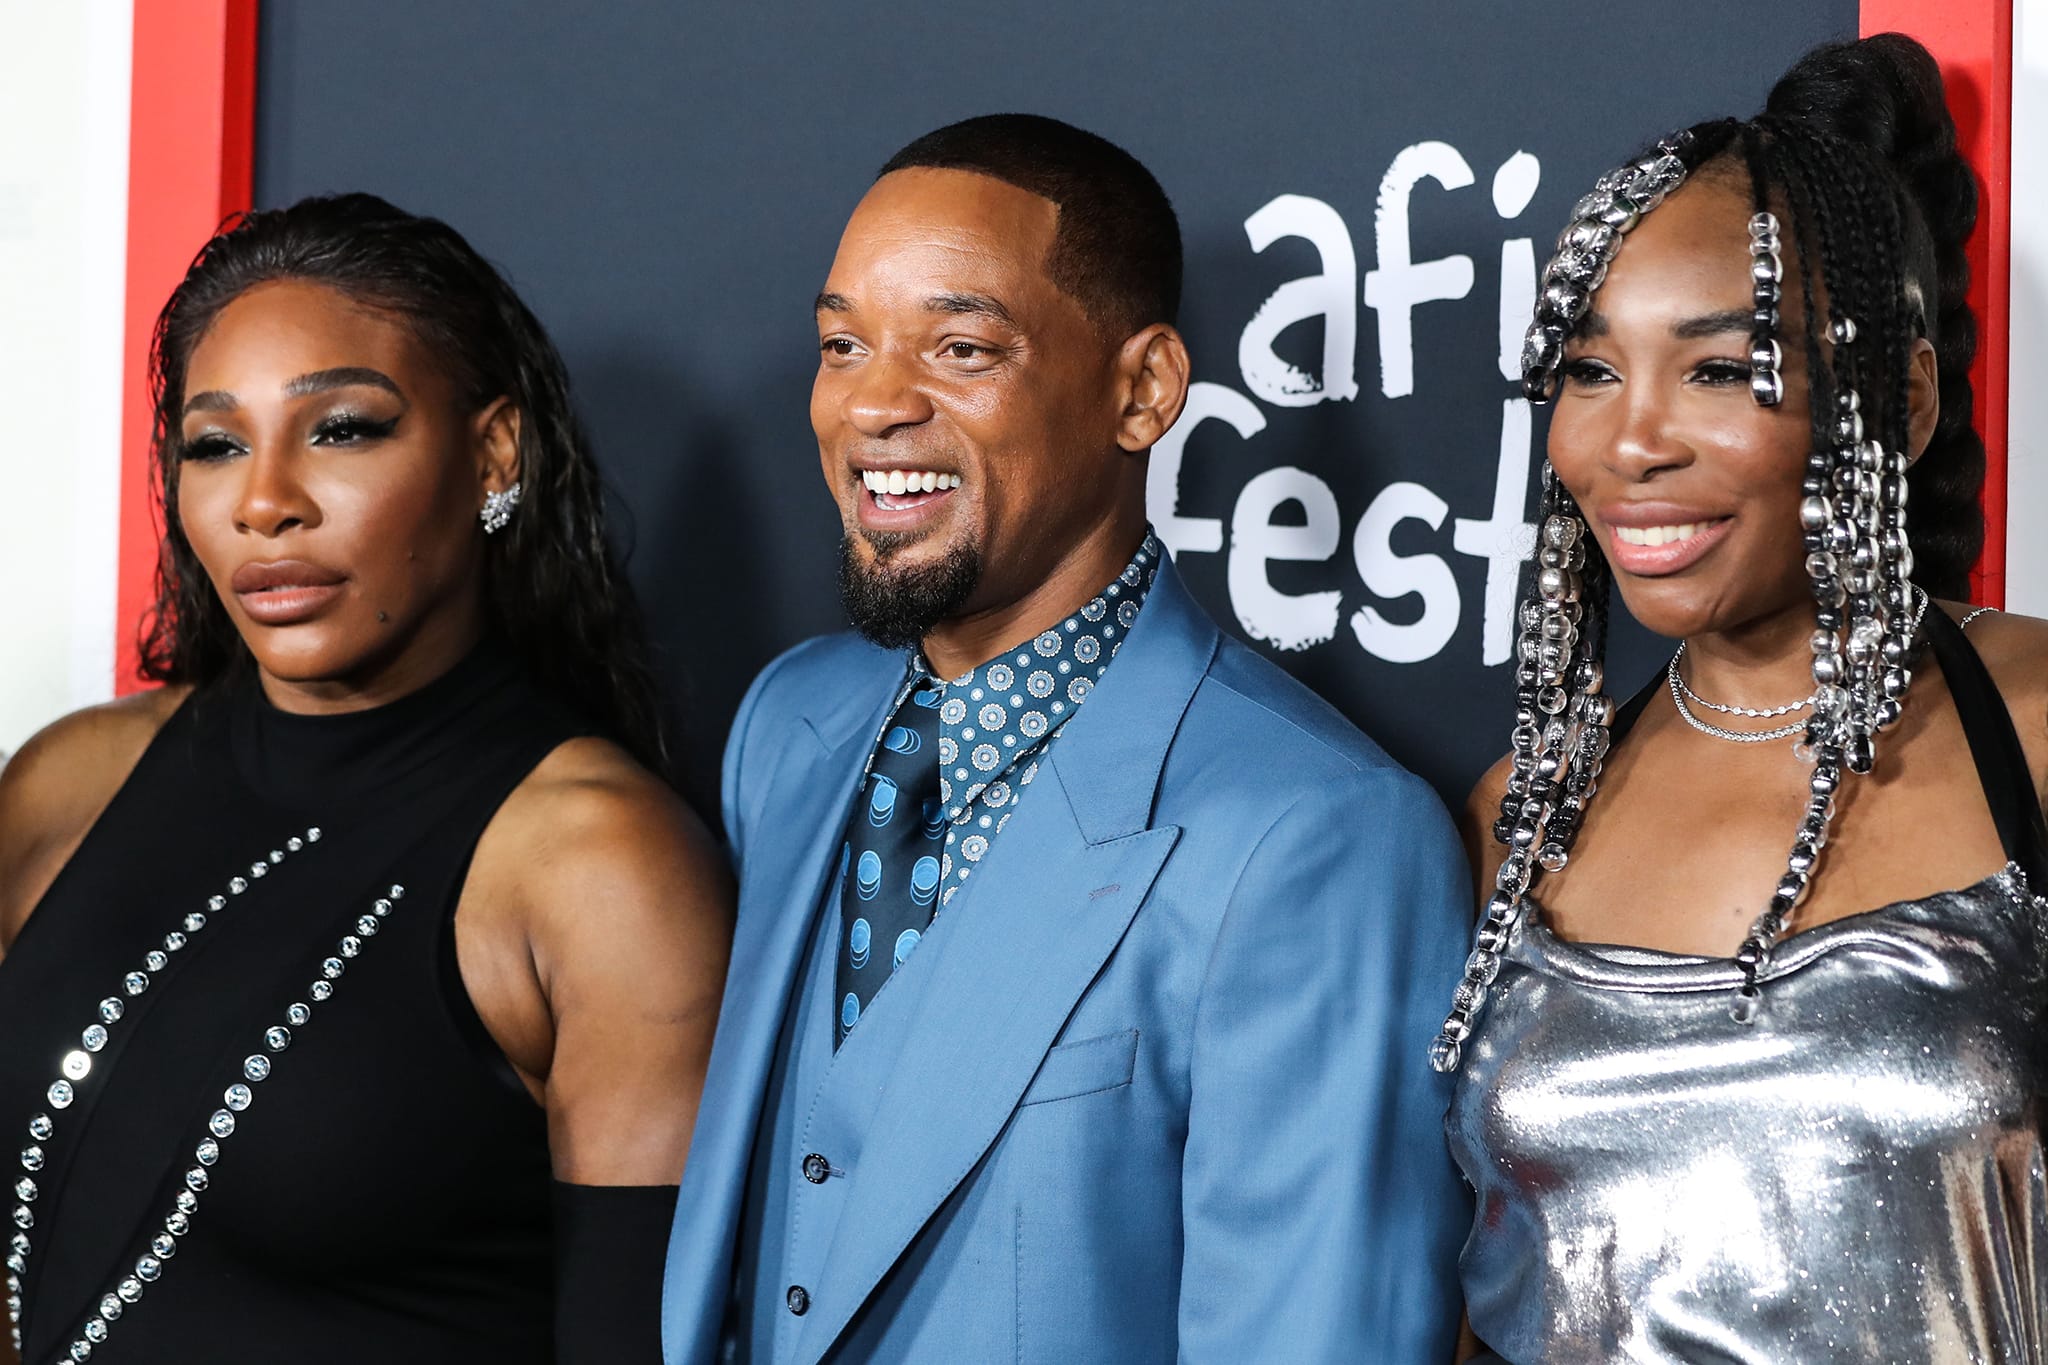 Serena and Venus Williams pose with Will Smith, who stars as Richard Williams in the biopic about their father and coach